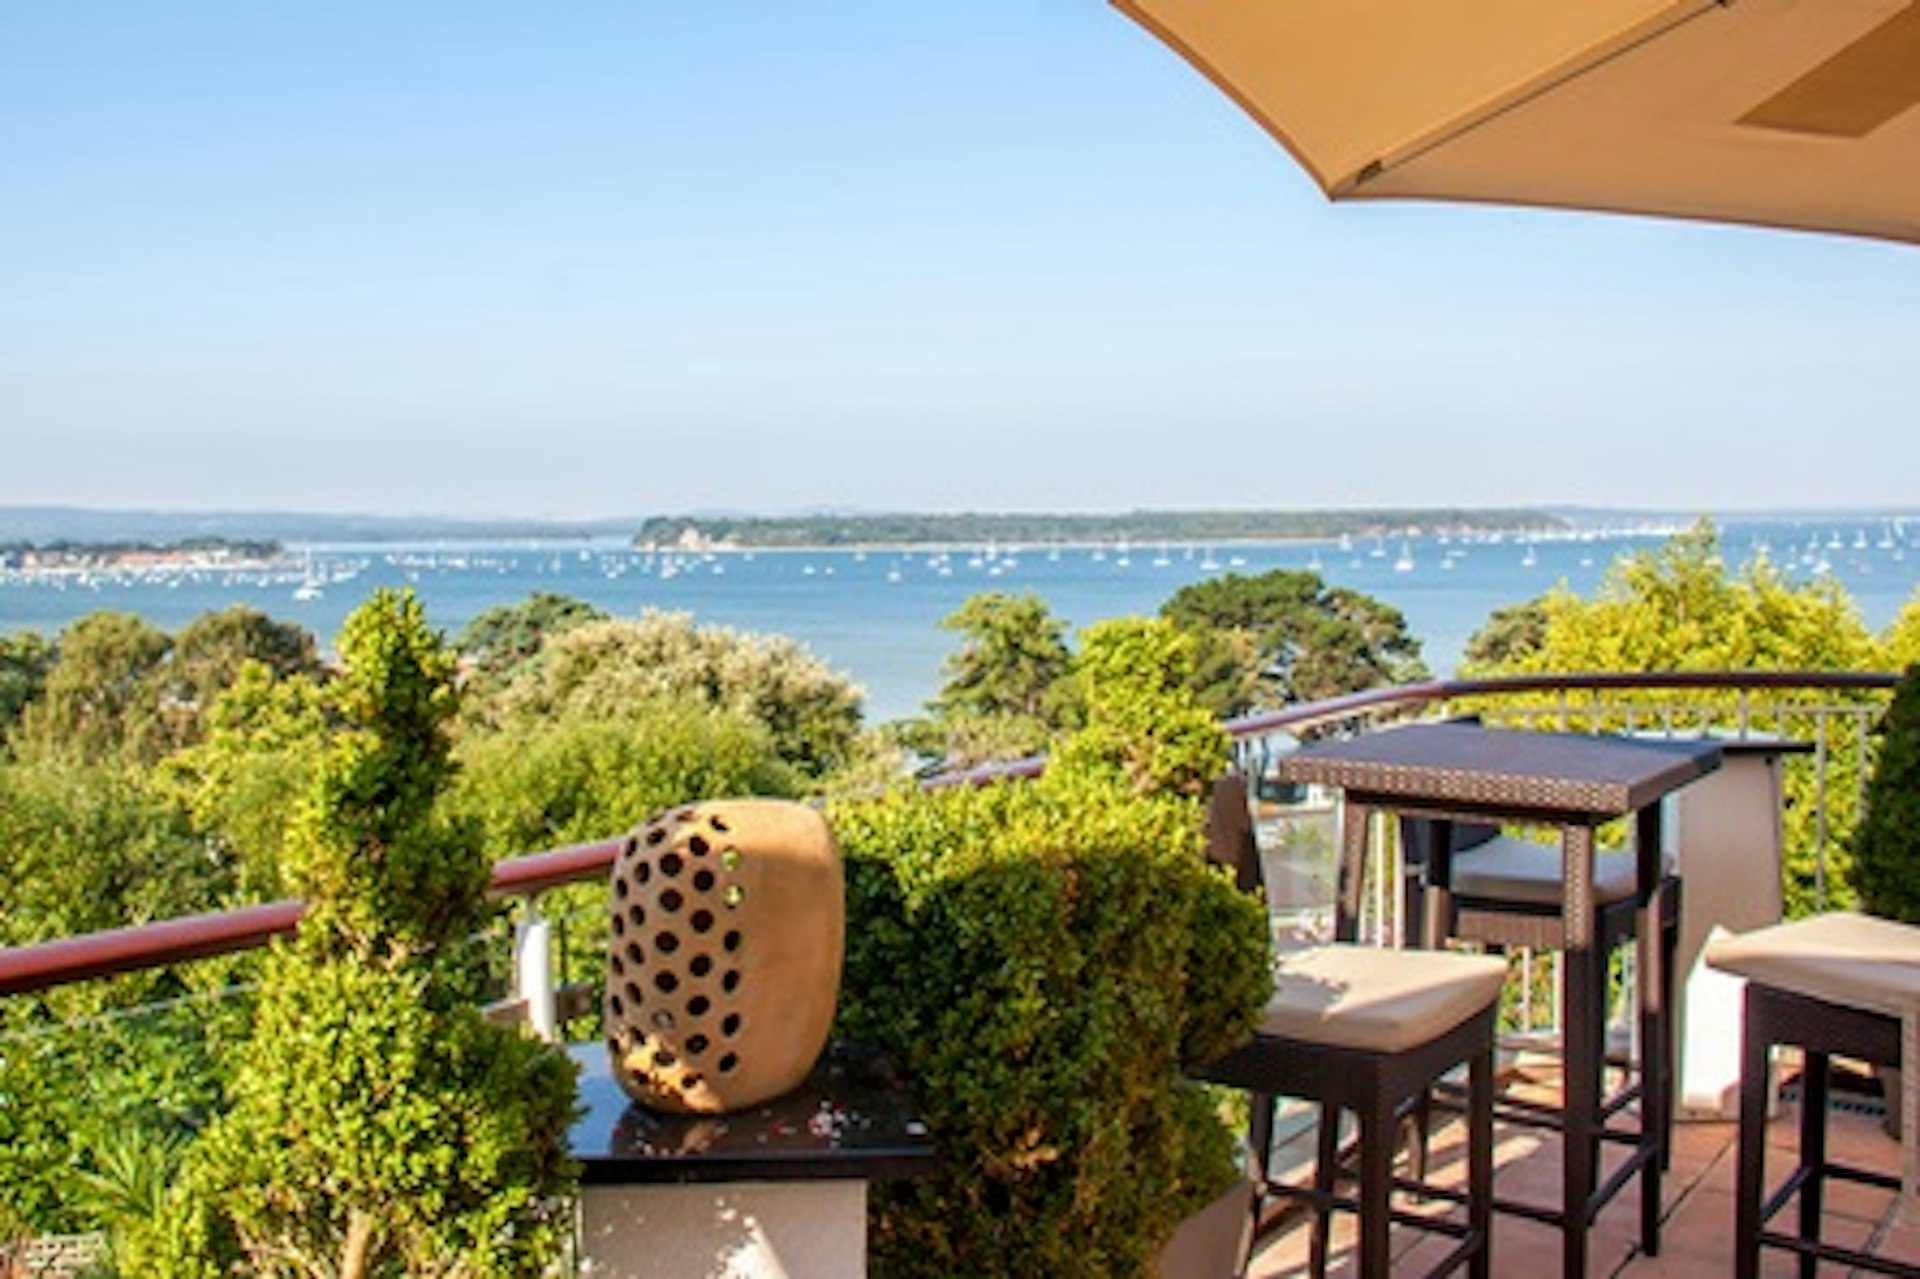 One Night Coastal Break for Two at the 4* Harbour Heights Hotel, Poole 1